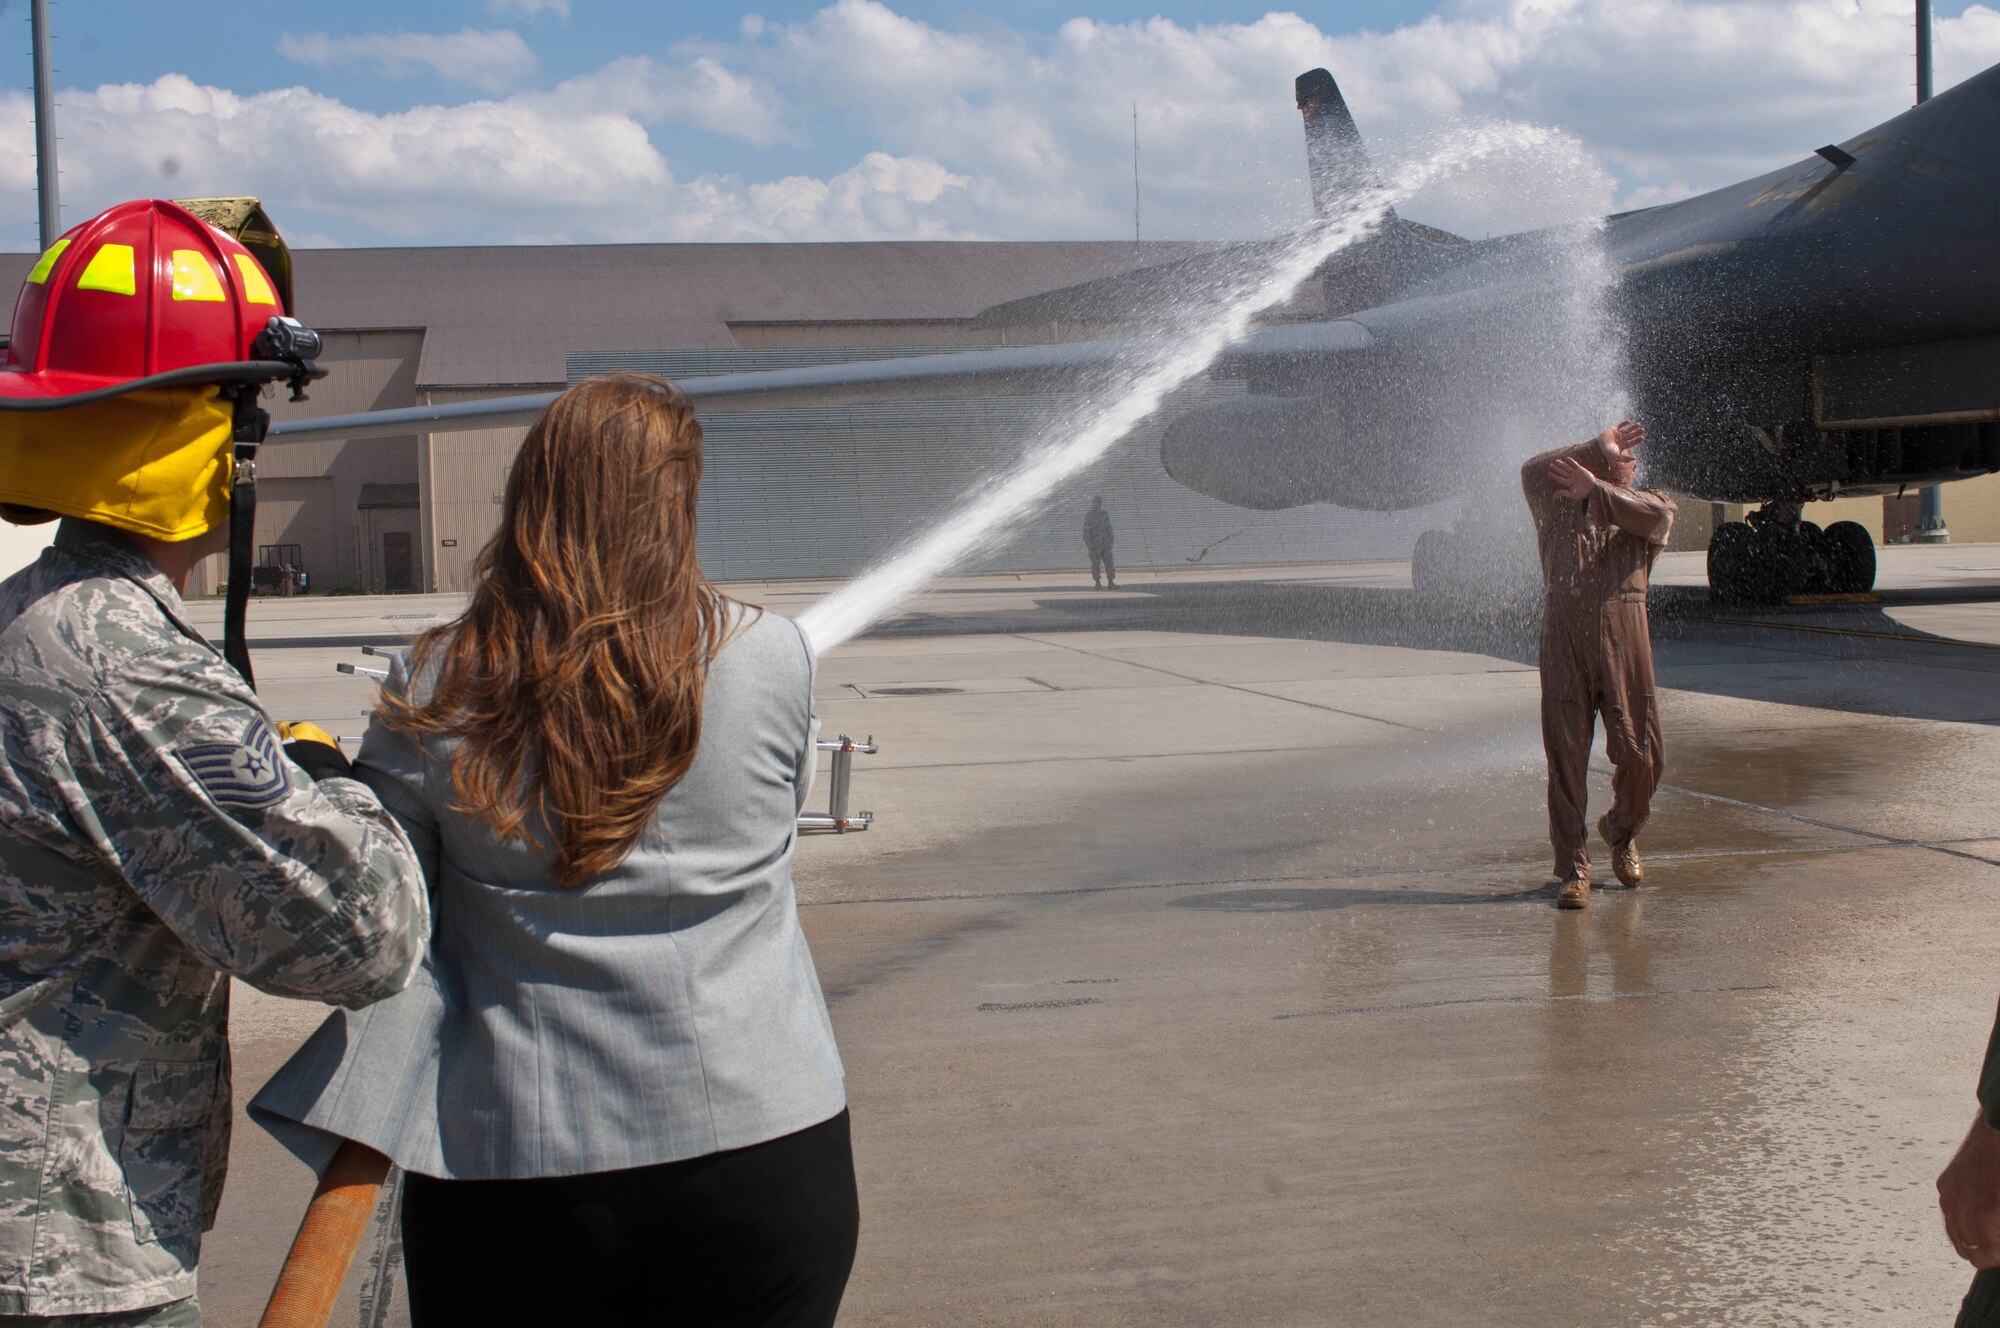 Tania Schepper, wife of Lt. Col. Timothy Schepper, 28th Operations Group senior evaluator, hoses down her husband after his return flight from Southwest Asia at Ellsworth Air Force Base, S.D., July 15, 2013. Schepper is the first B-1 bomber aviator in history to achieve 5,000 flying hours. The pilot with the next highest amount of hours at Ellsworth has flown 3,270 hours. (U.S. Air Force photo by Airman 1st Class Zachary Hada/Released)